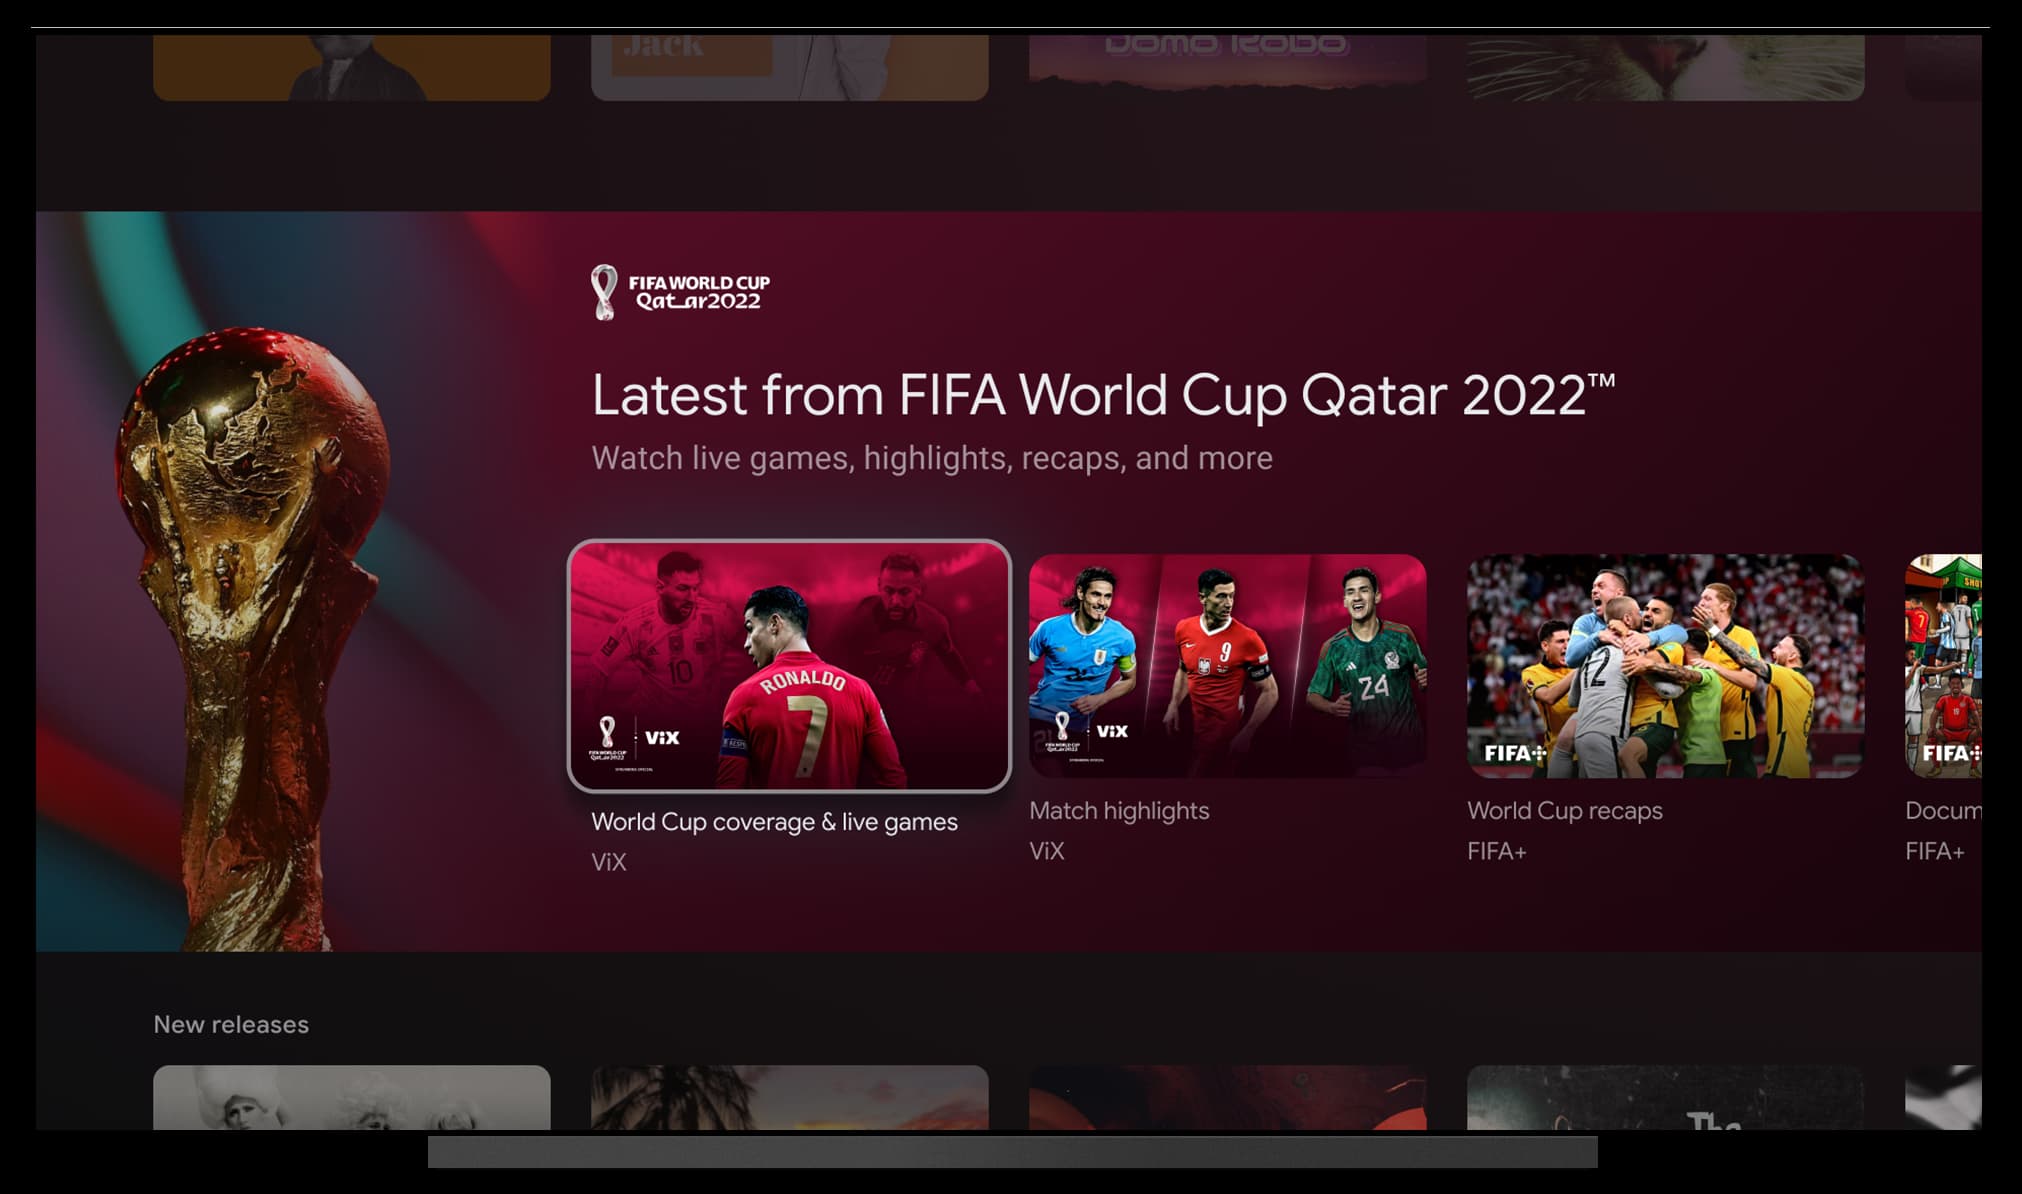 websites to watch the world cup 2022